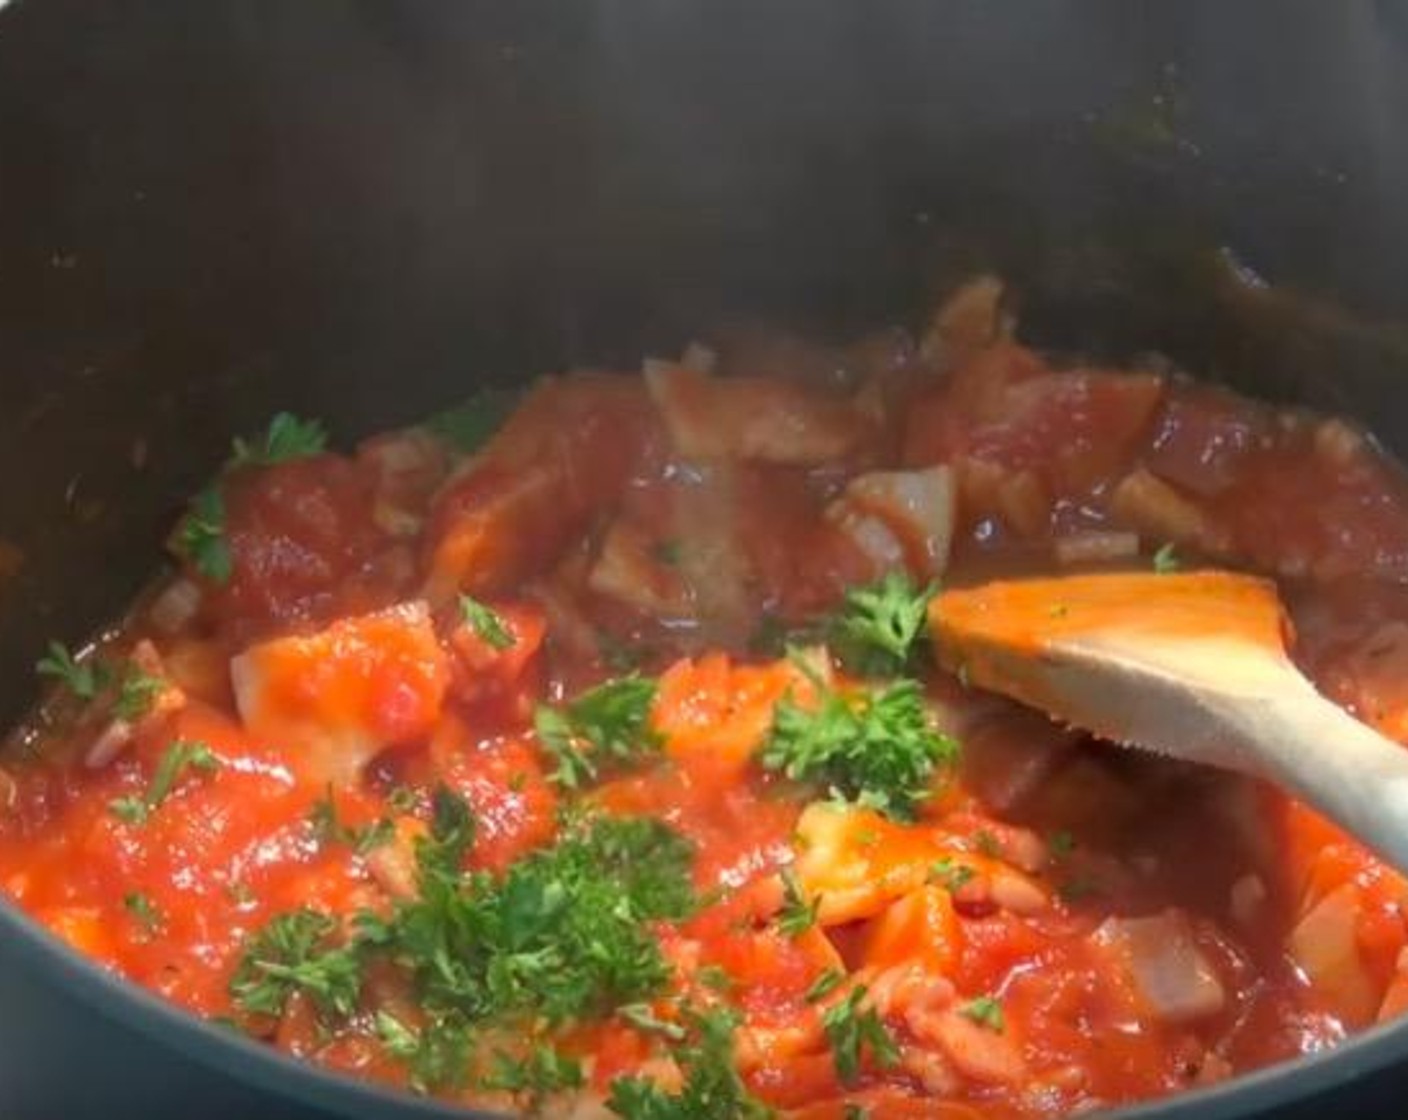 step 3 Add in Canned Diced Tomatoes (1 3/4 cups), Tomato Paste (2 Tbsp), Worcestershire Sauce (1 Tbsp), Salt (to taste), and Ground Black Pepper (to taste). Cook, stirring occasionally, for 5 minutes, or until sauce has thickened up slightly. Sprinkle in Fresh Parsley (1 Tbsp).